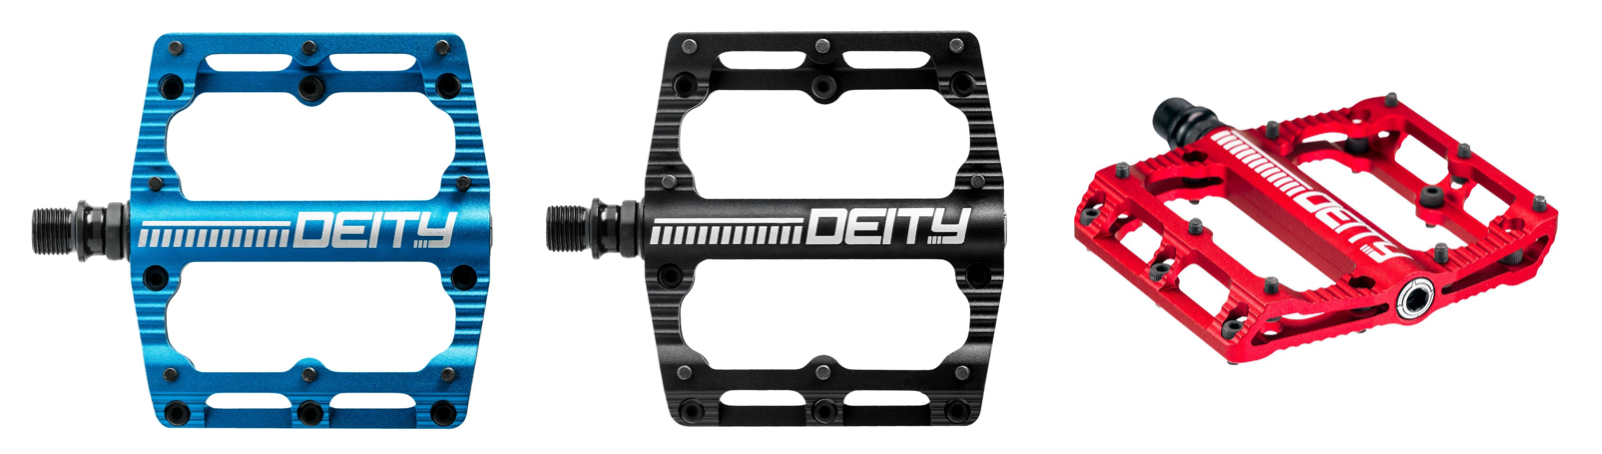 MTB Flat Pedal Buyer's Guide - Worldwide Cyclery